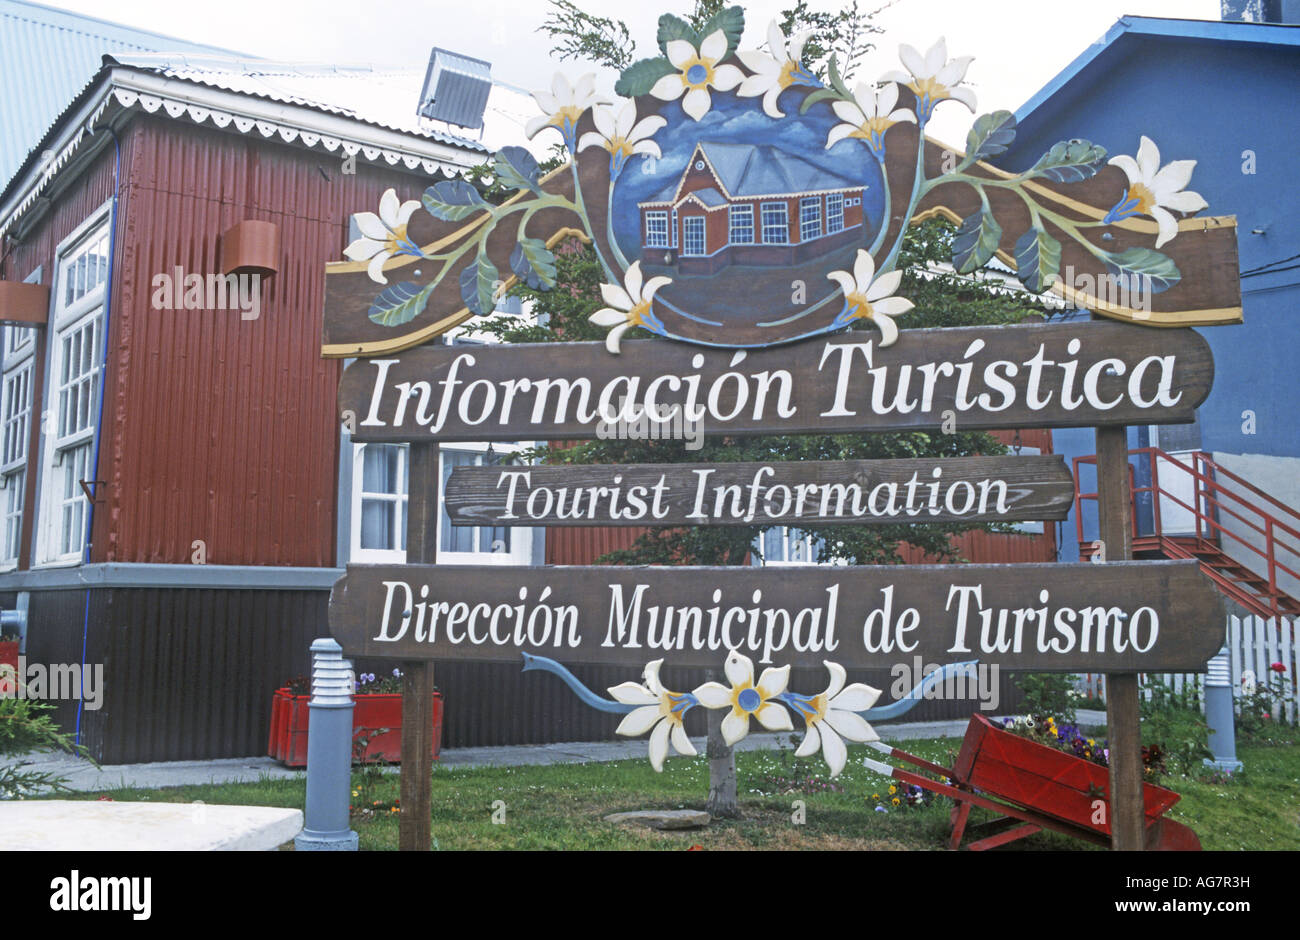 tourist attractions aimed at Antarctic cruise passengers in the boom town port of Ushuaia,Argentina,South America Stock Photo